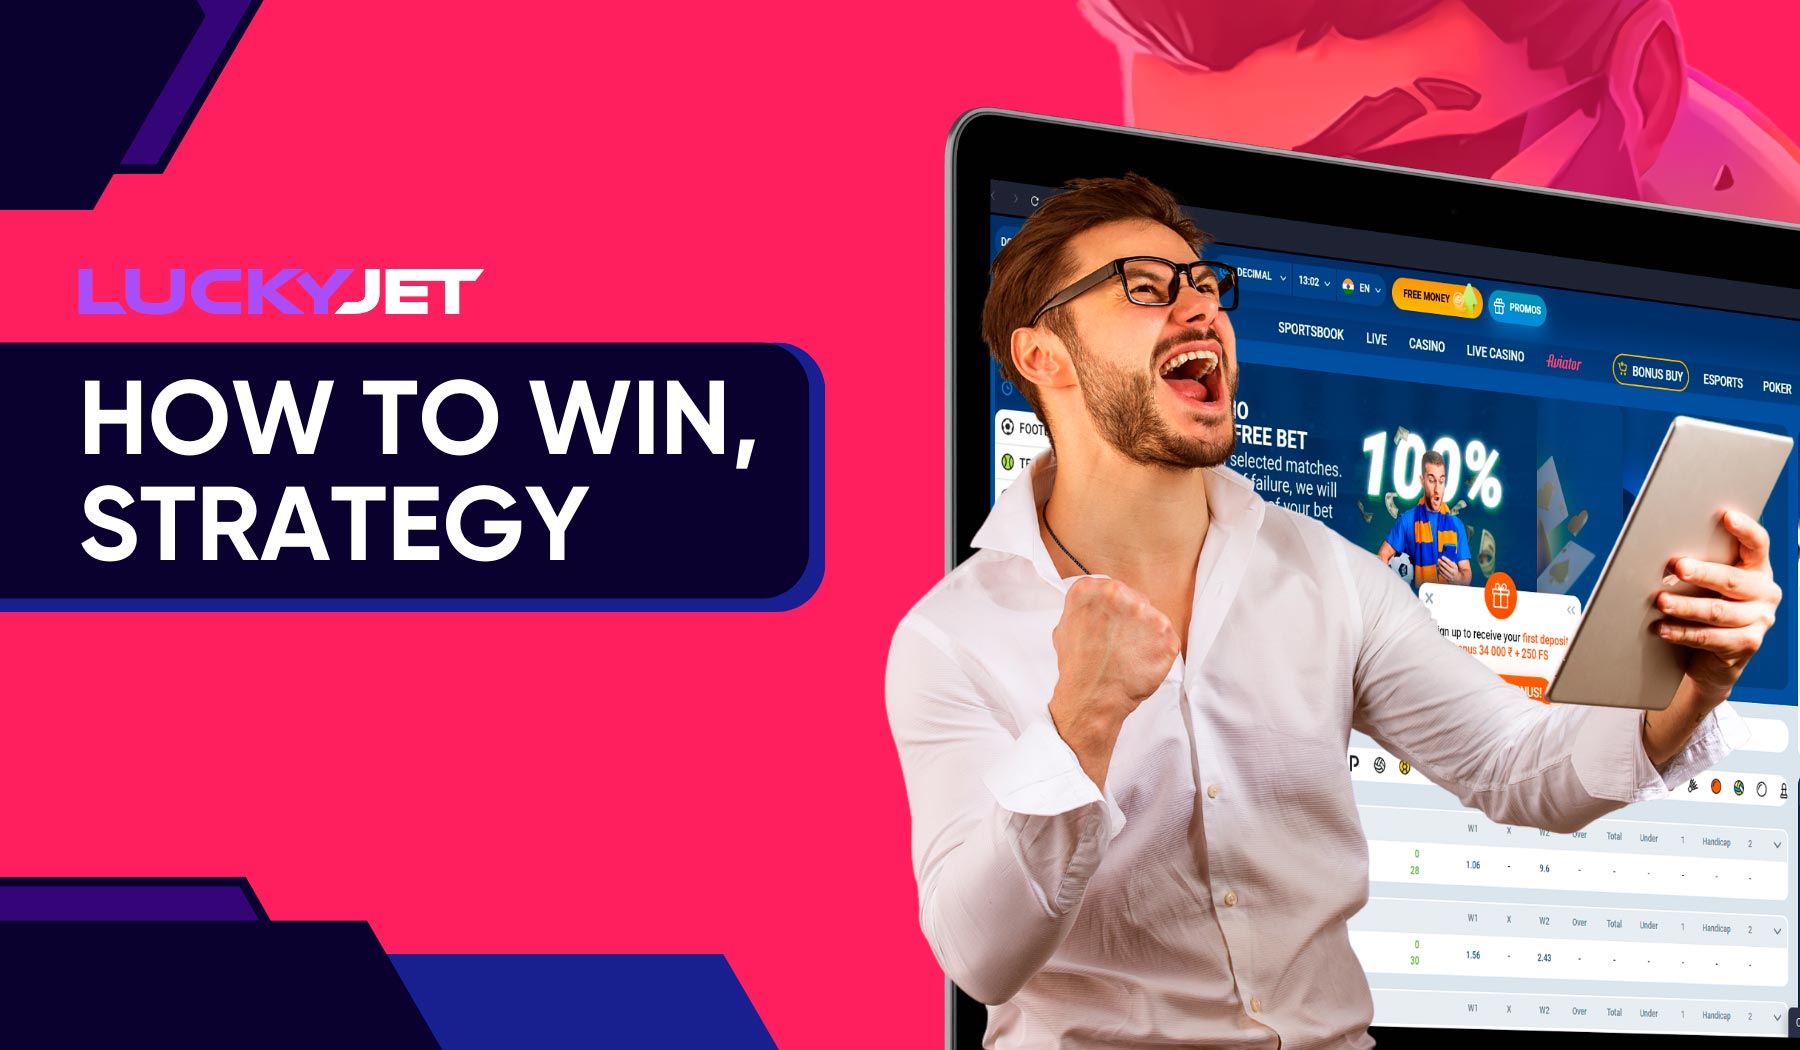 Strategies and Tips to Win Mostbet Lucky Jet